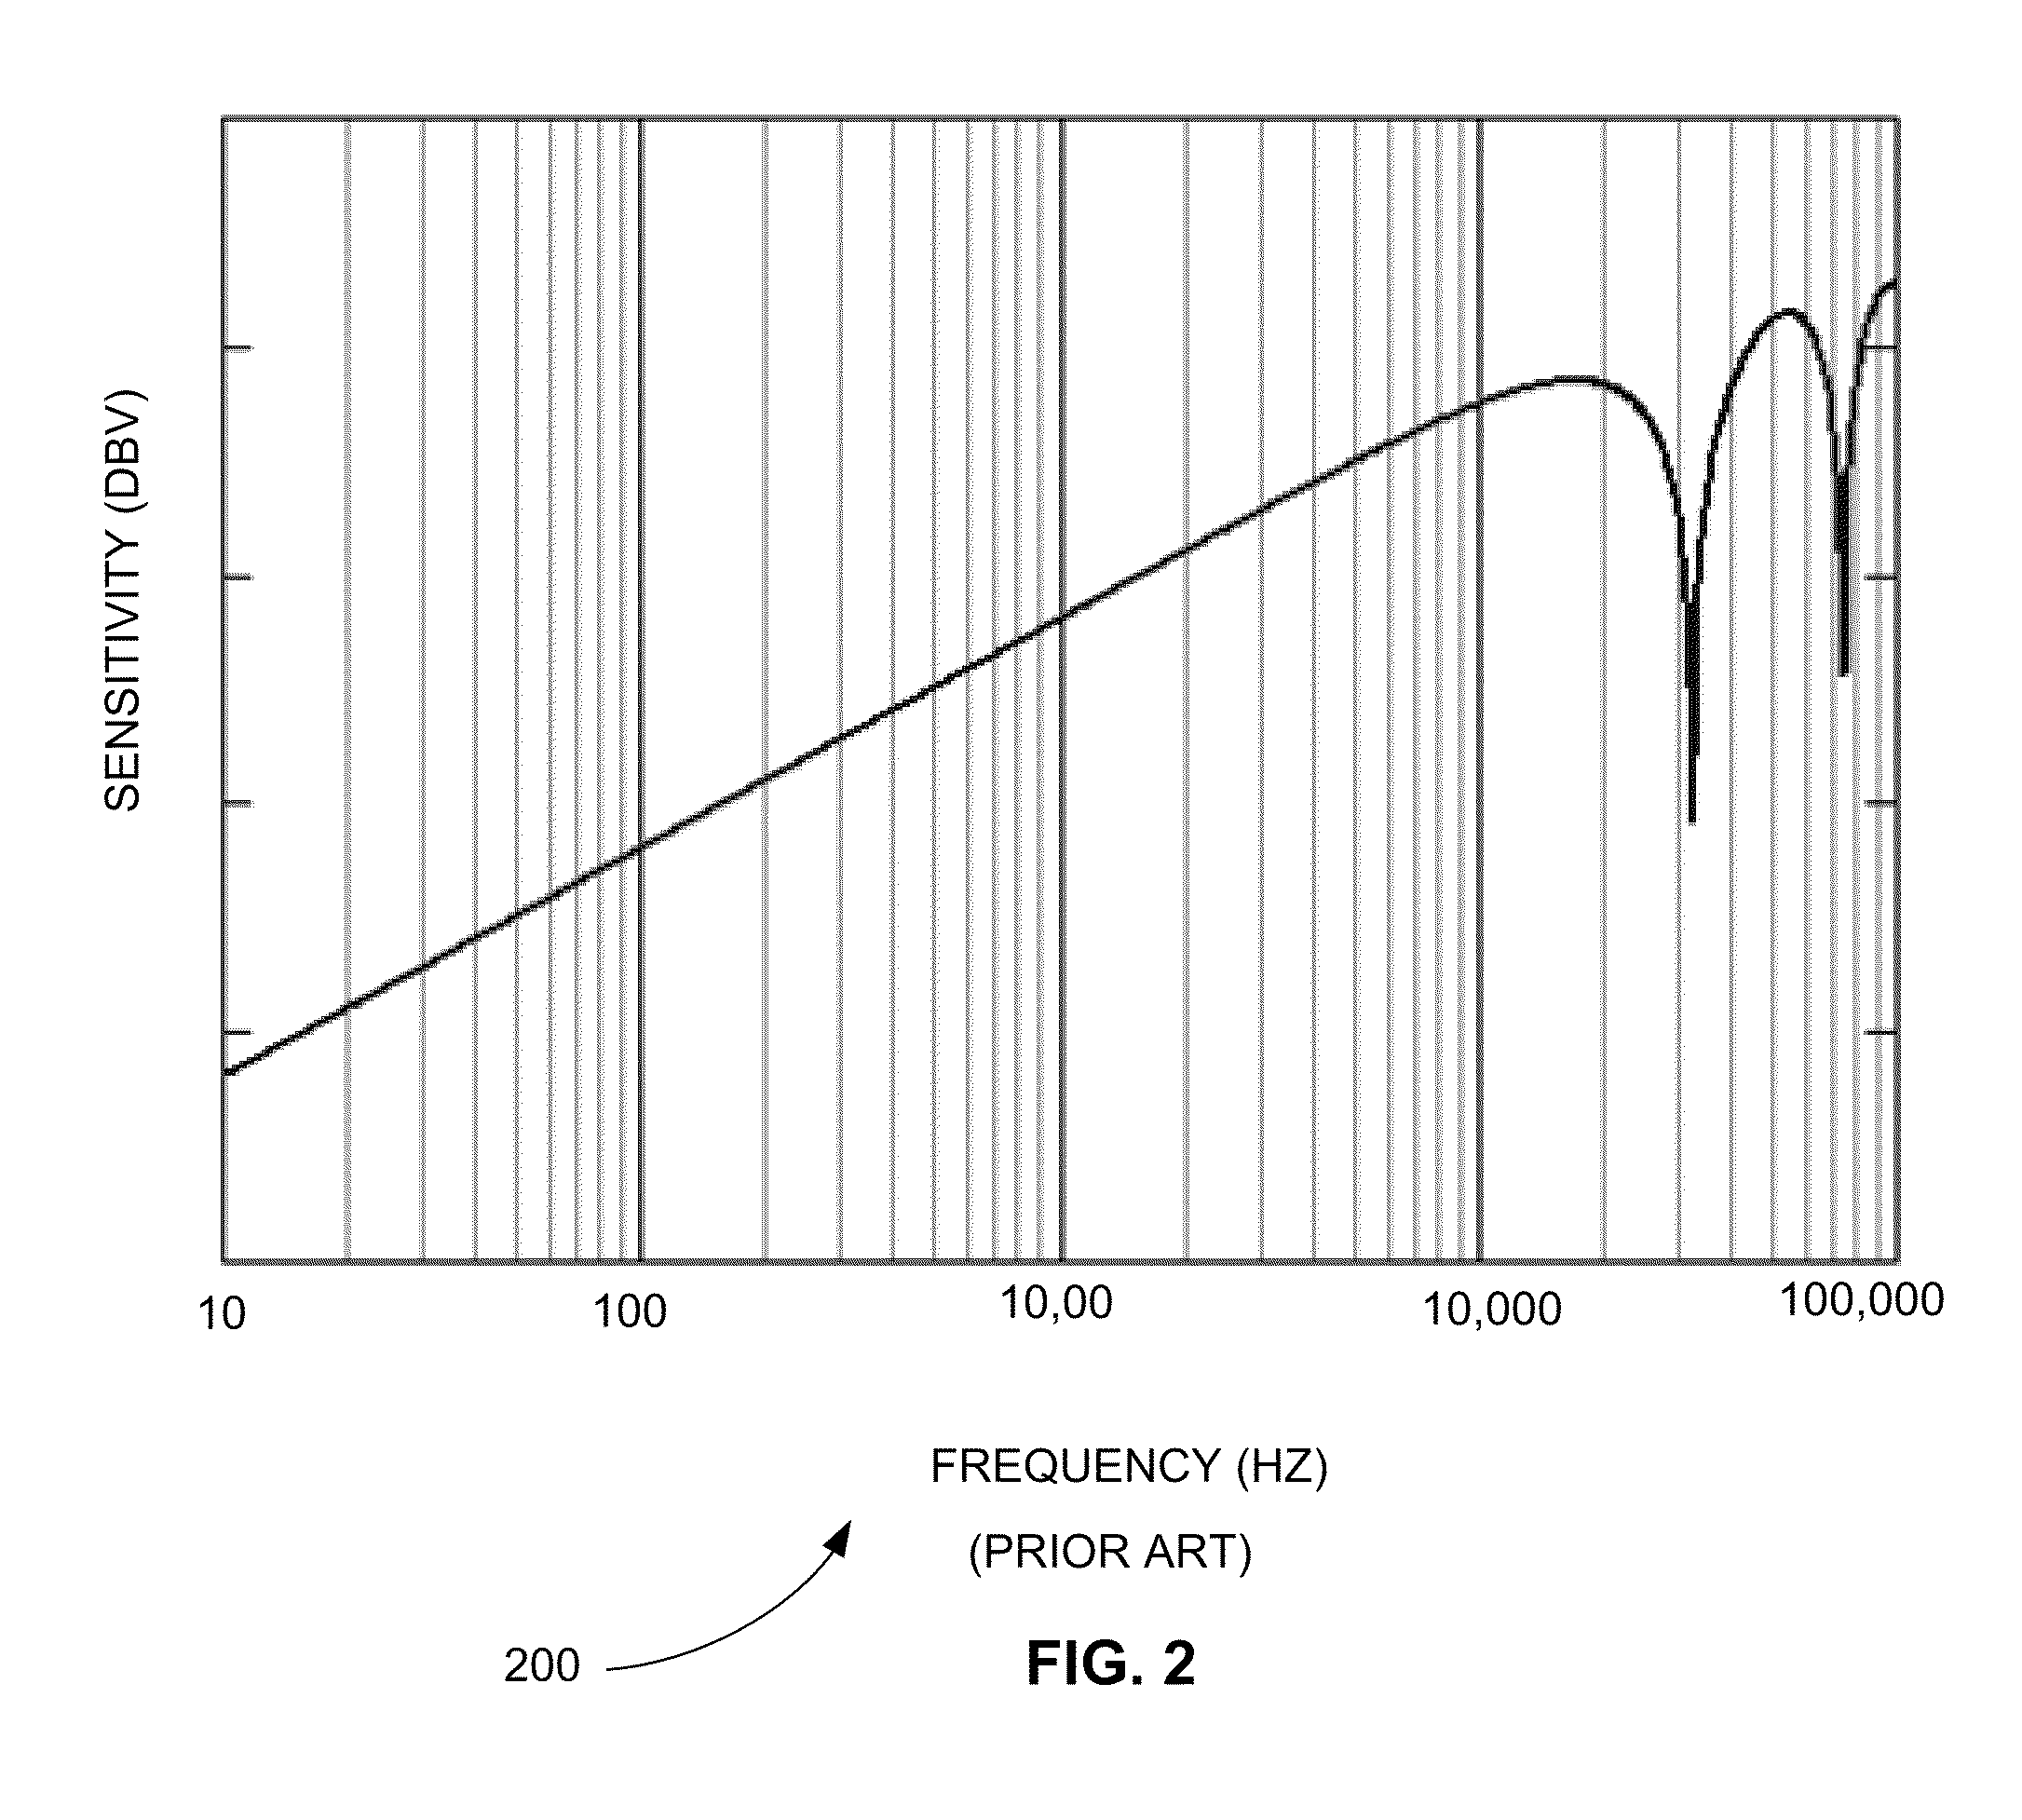 Acoustic velocity microphone using a buoyant object